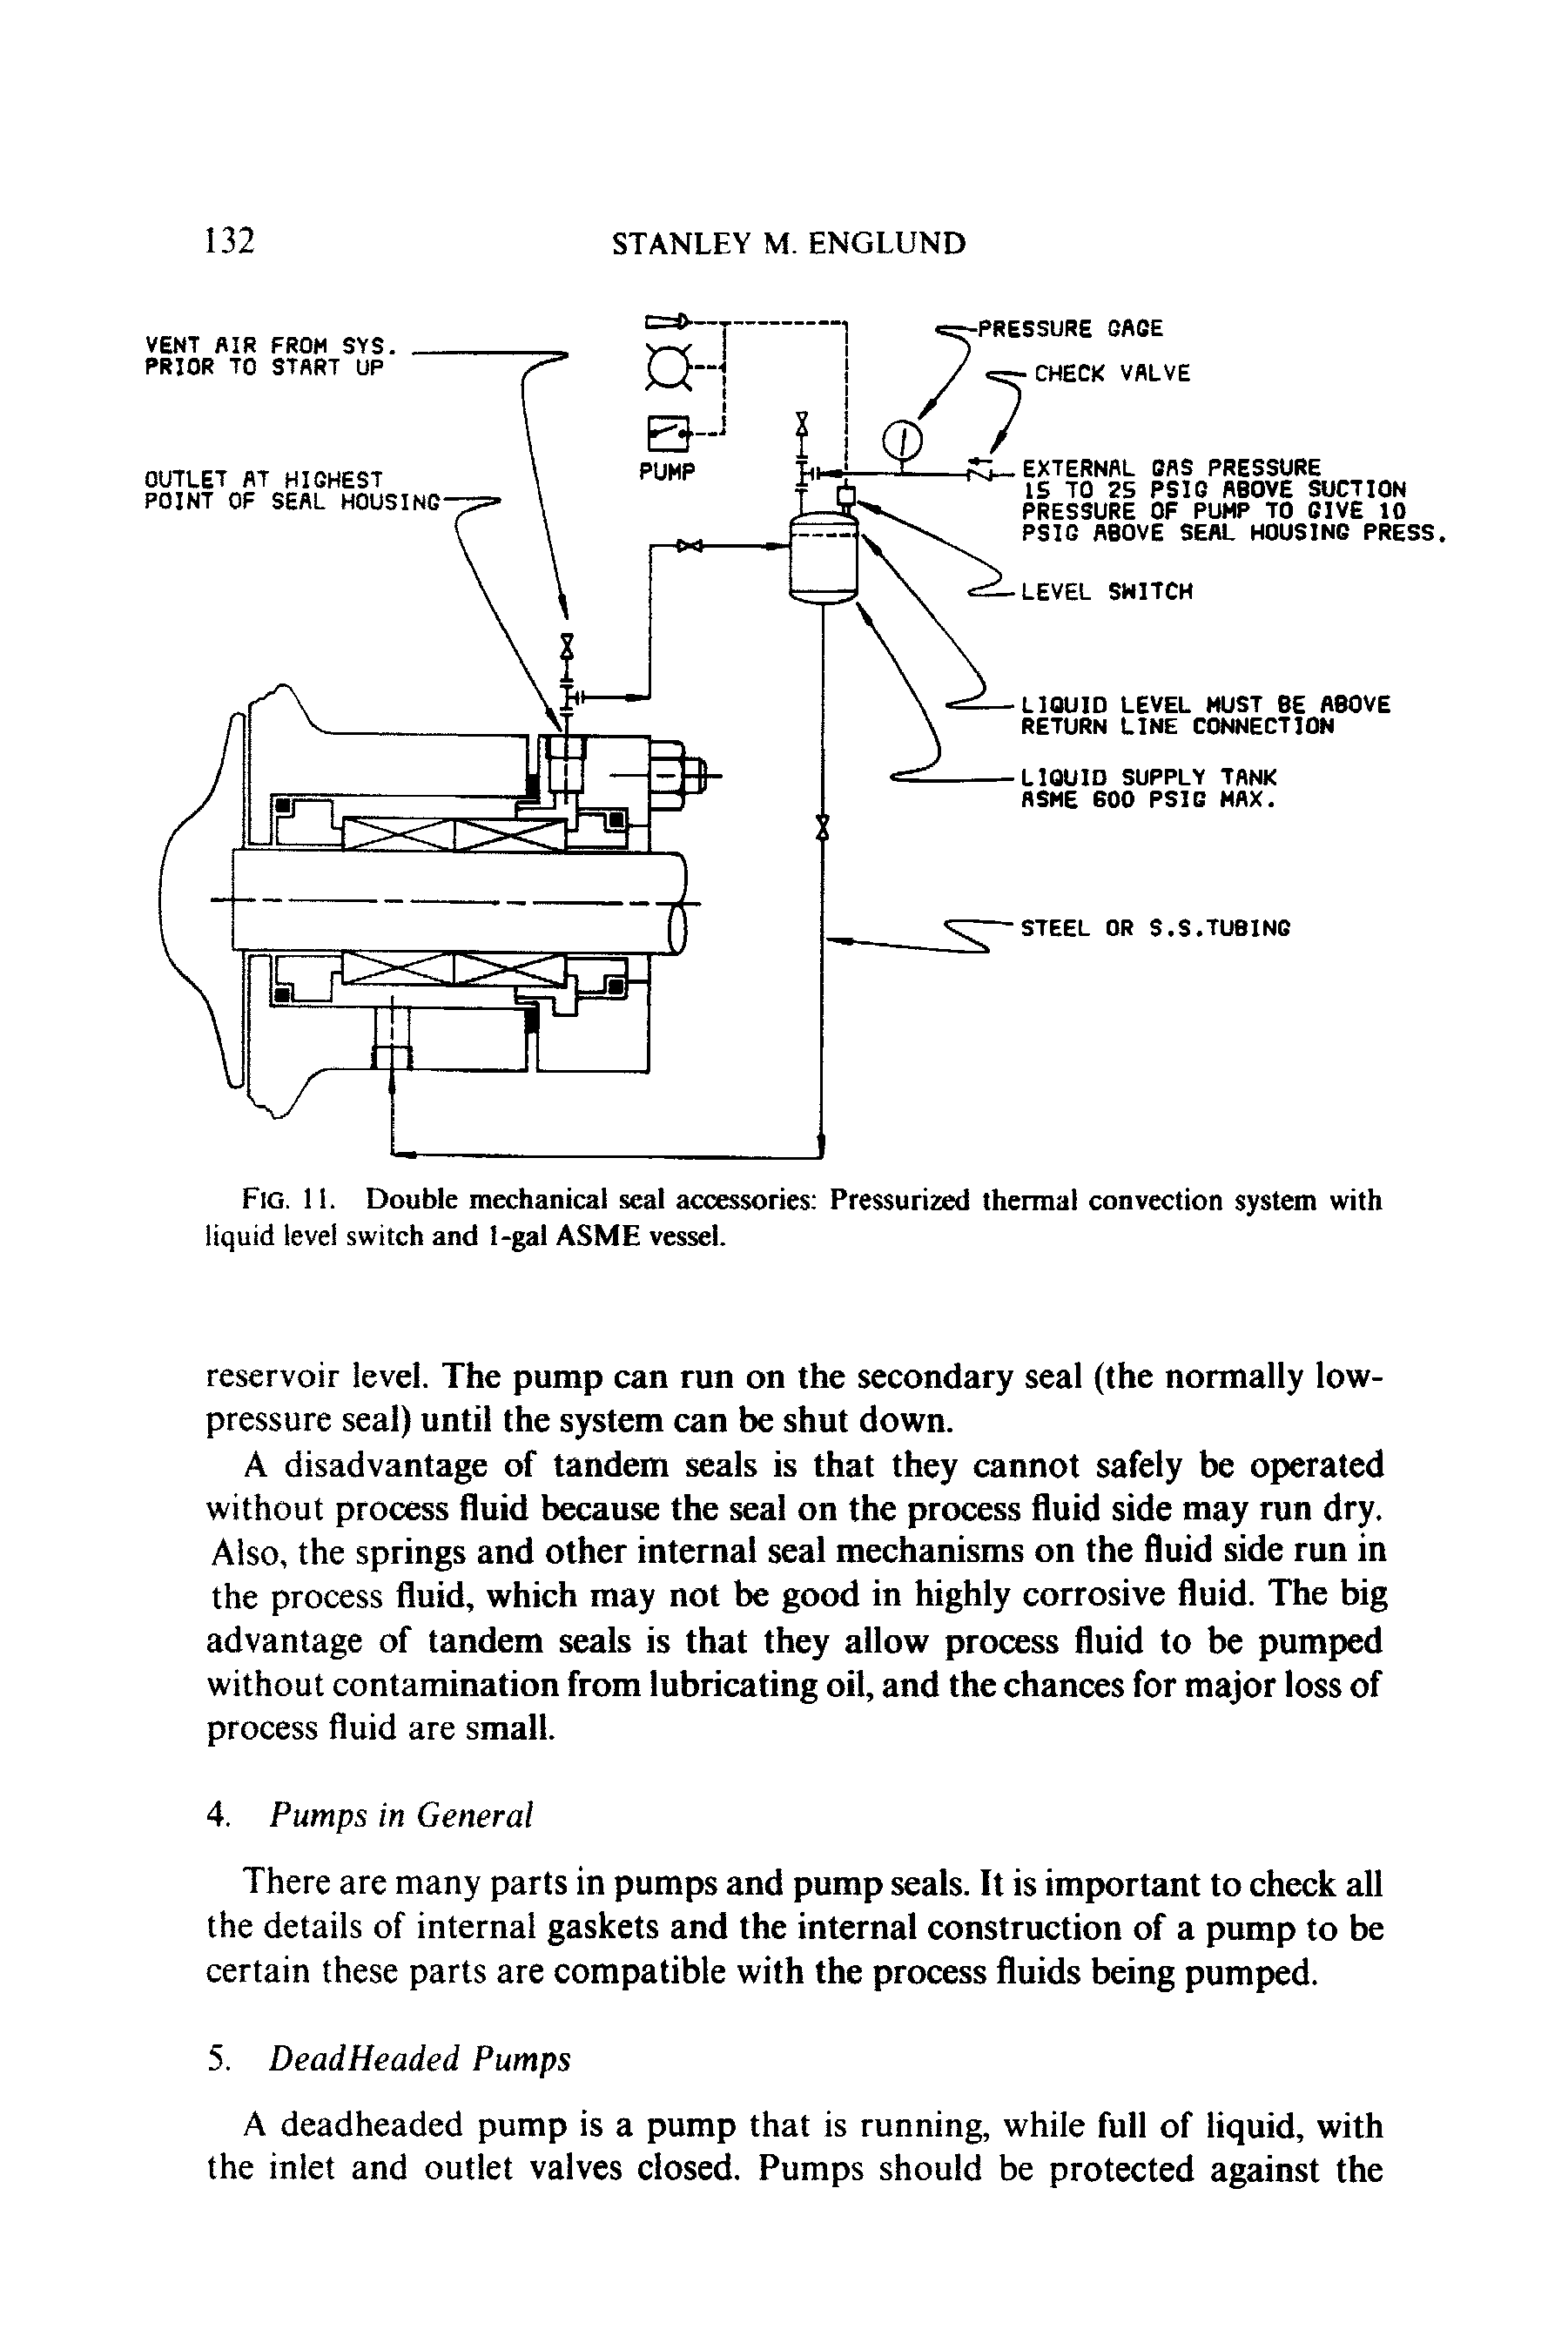 Fig. 11. Double mechanical seal accessories Pressurized thermal convection system with liquid level switch and 1-gal ASME vessel.